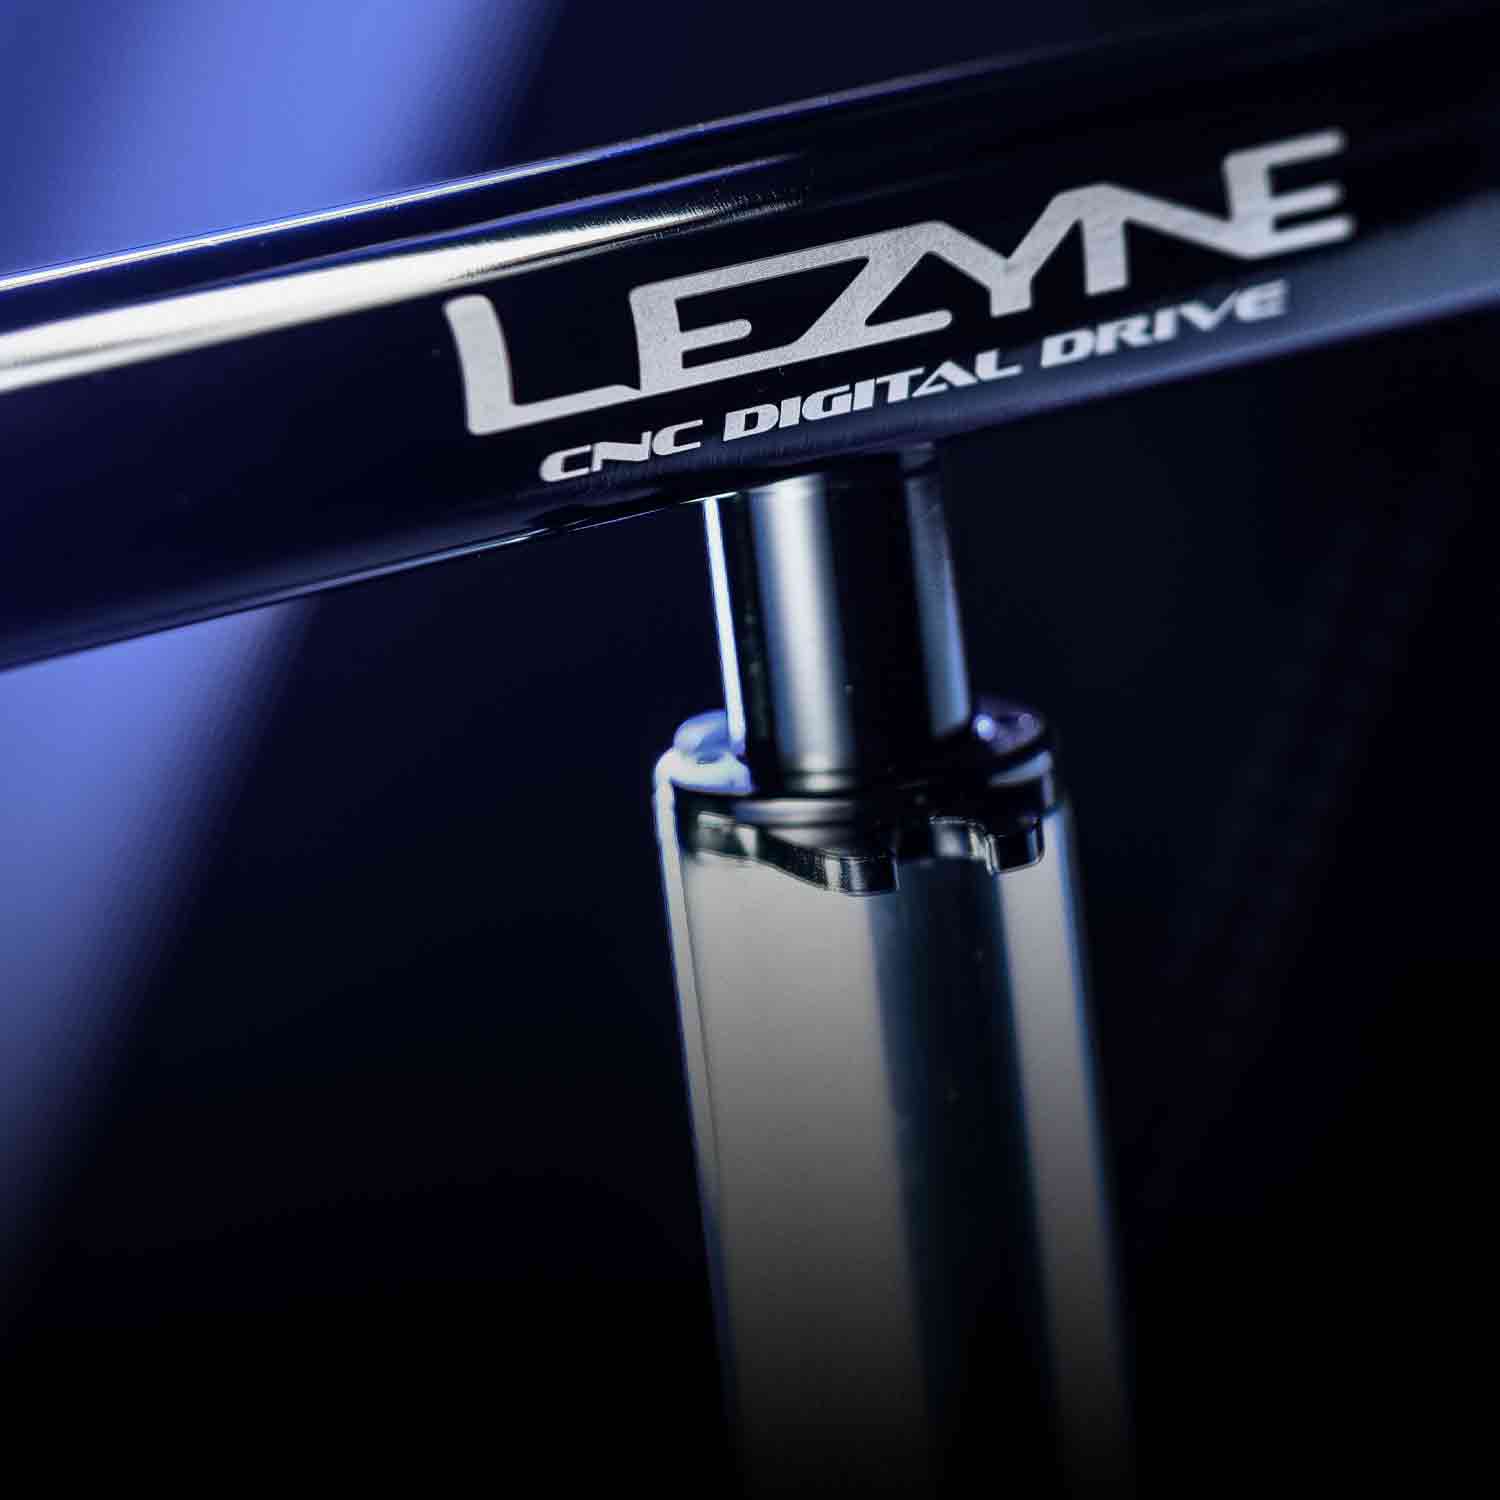 The handle of a floor pump with the words Lezyne CNC Digital Drive printed on it.